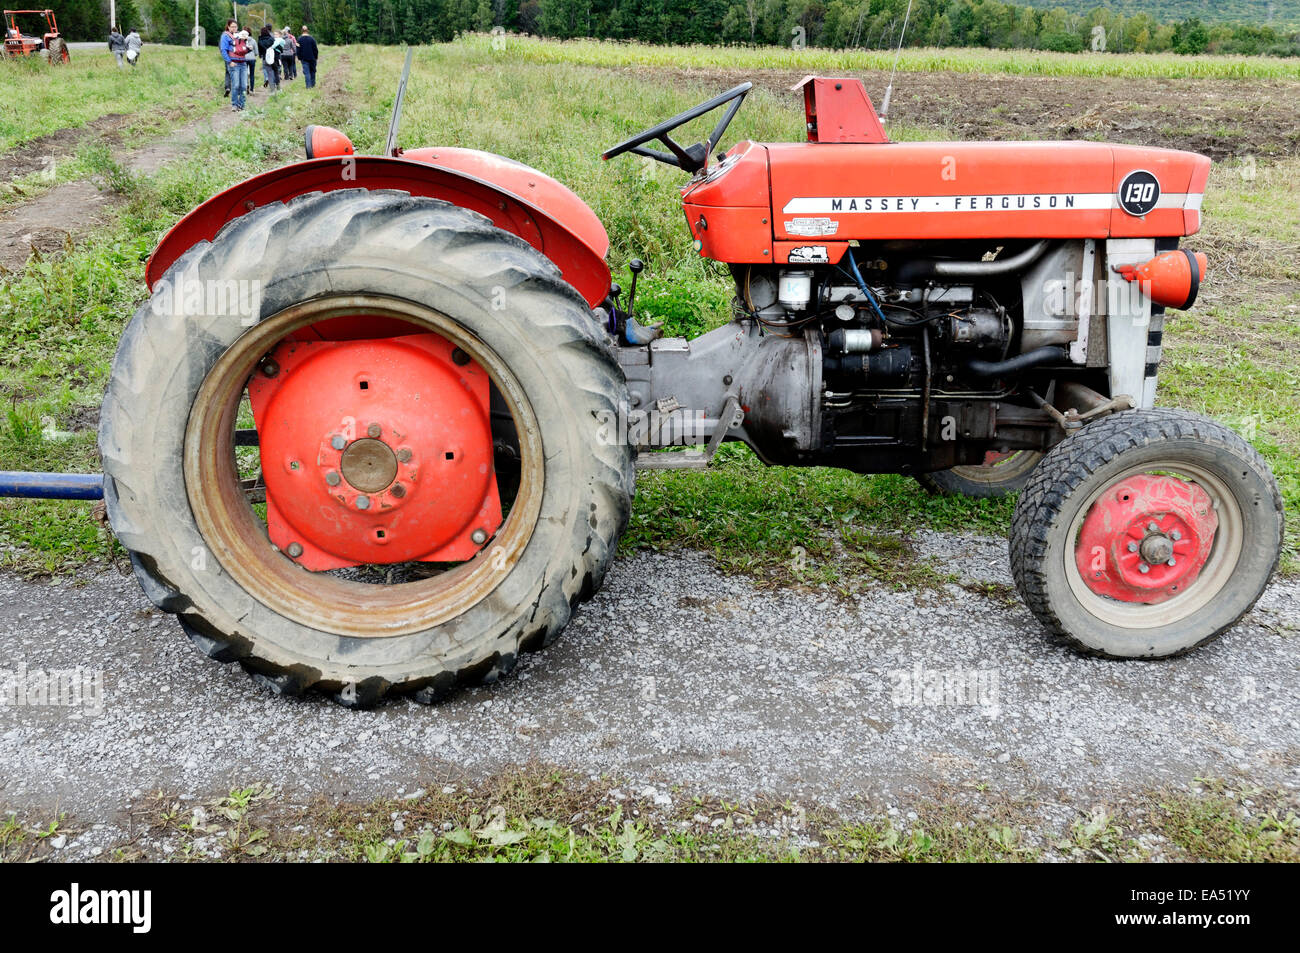 Massey Ferguson Tractor High Resolution Stock Photography And Images Alamy